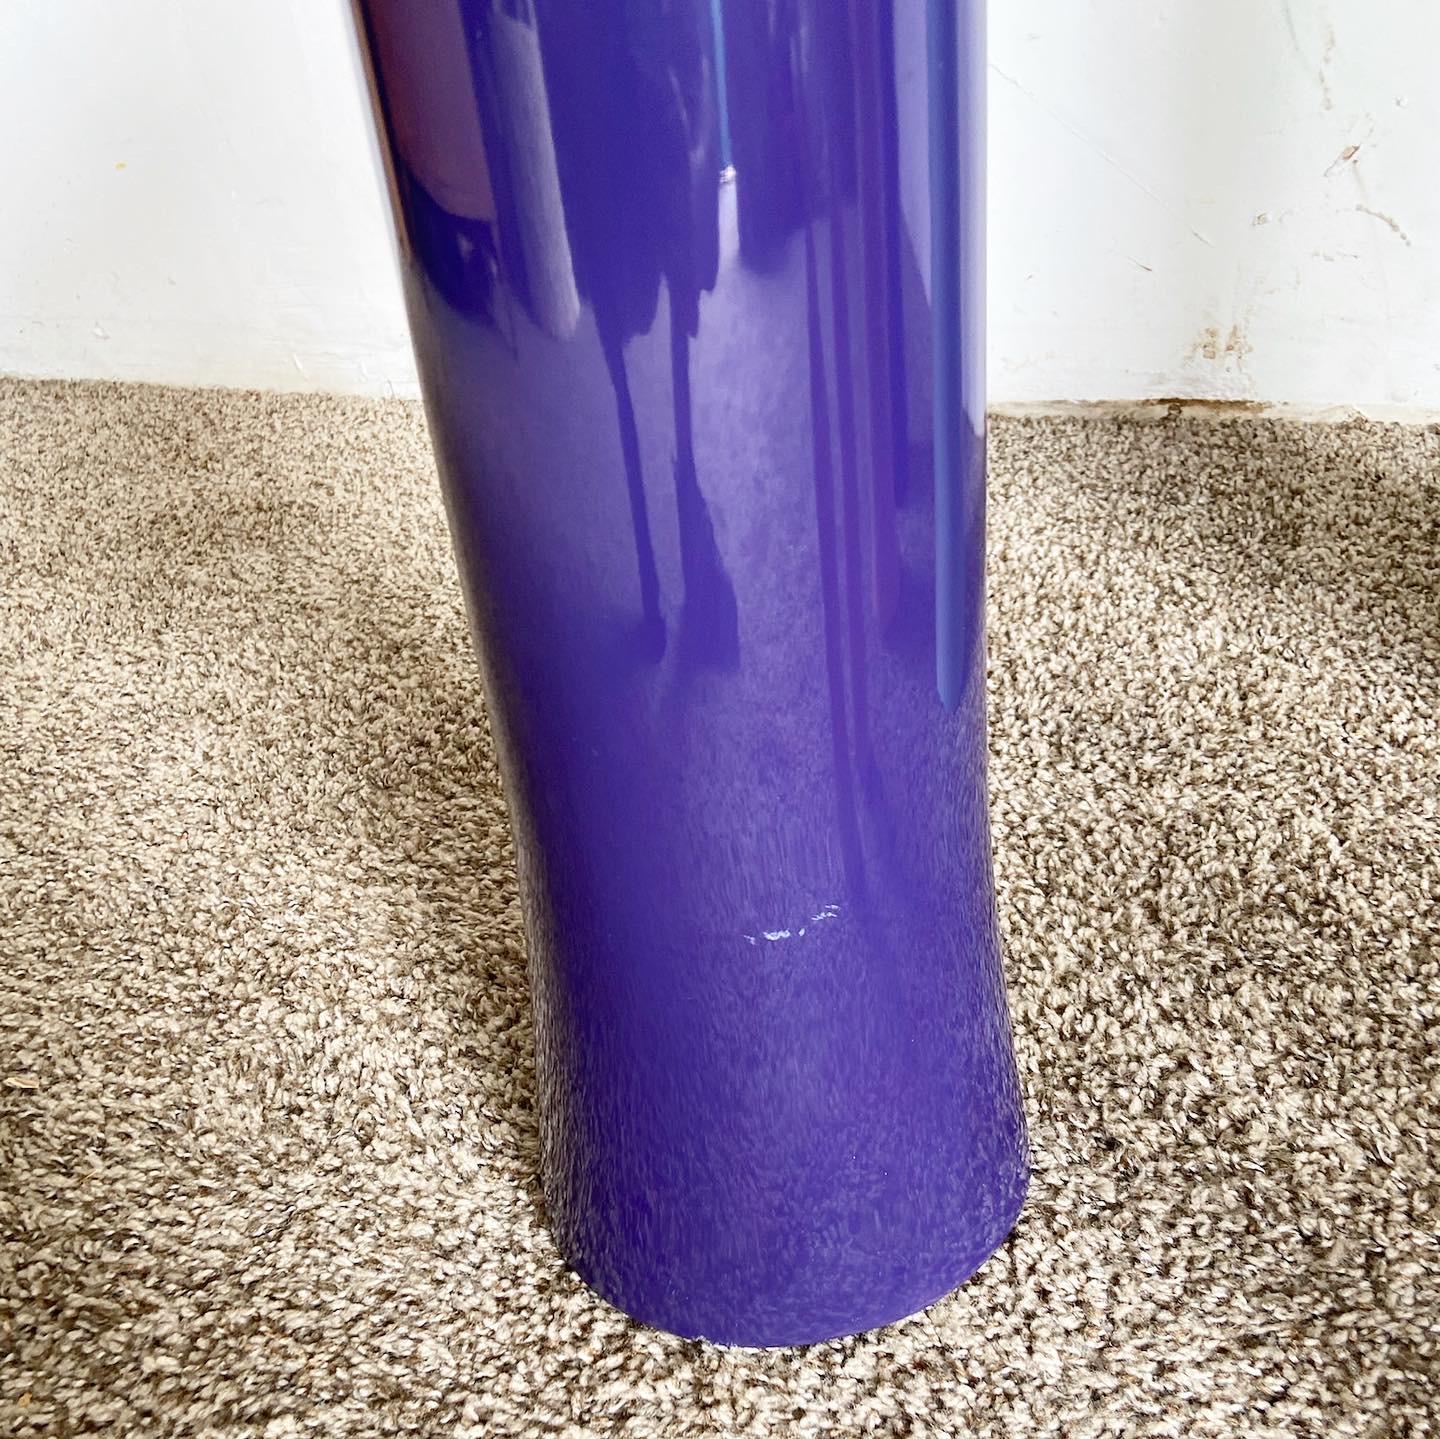 Late 20th Century Postmodern Vases by Oggetti in Pink, Purple, and Teal - 6 Pieces For Sale